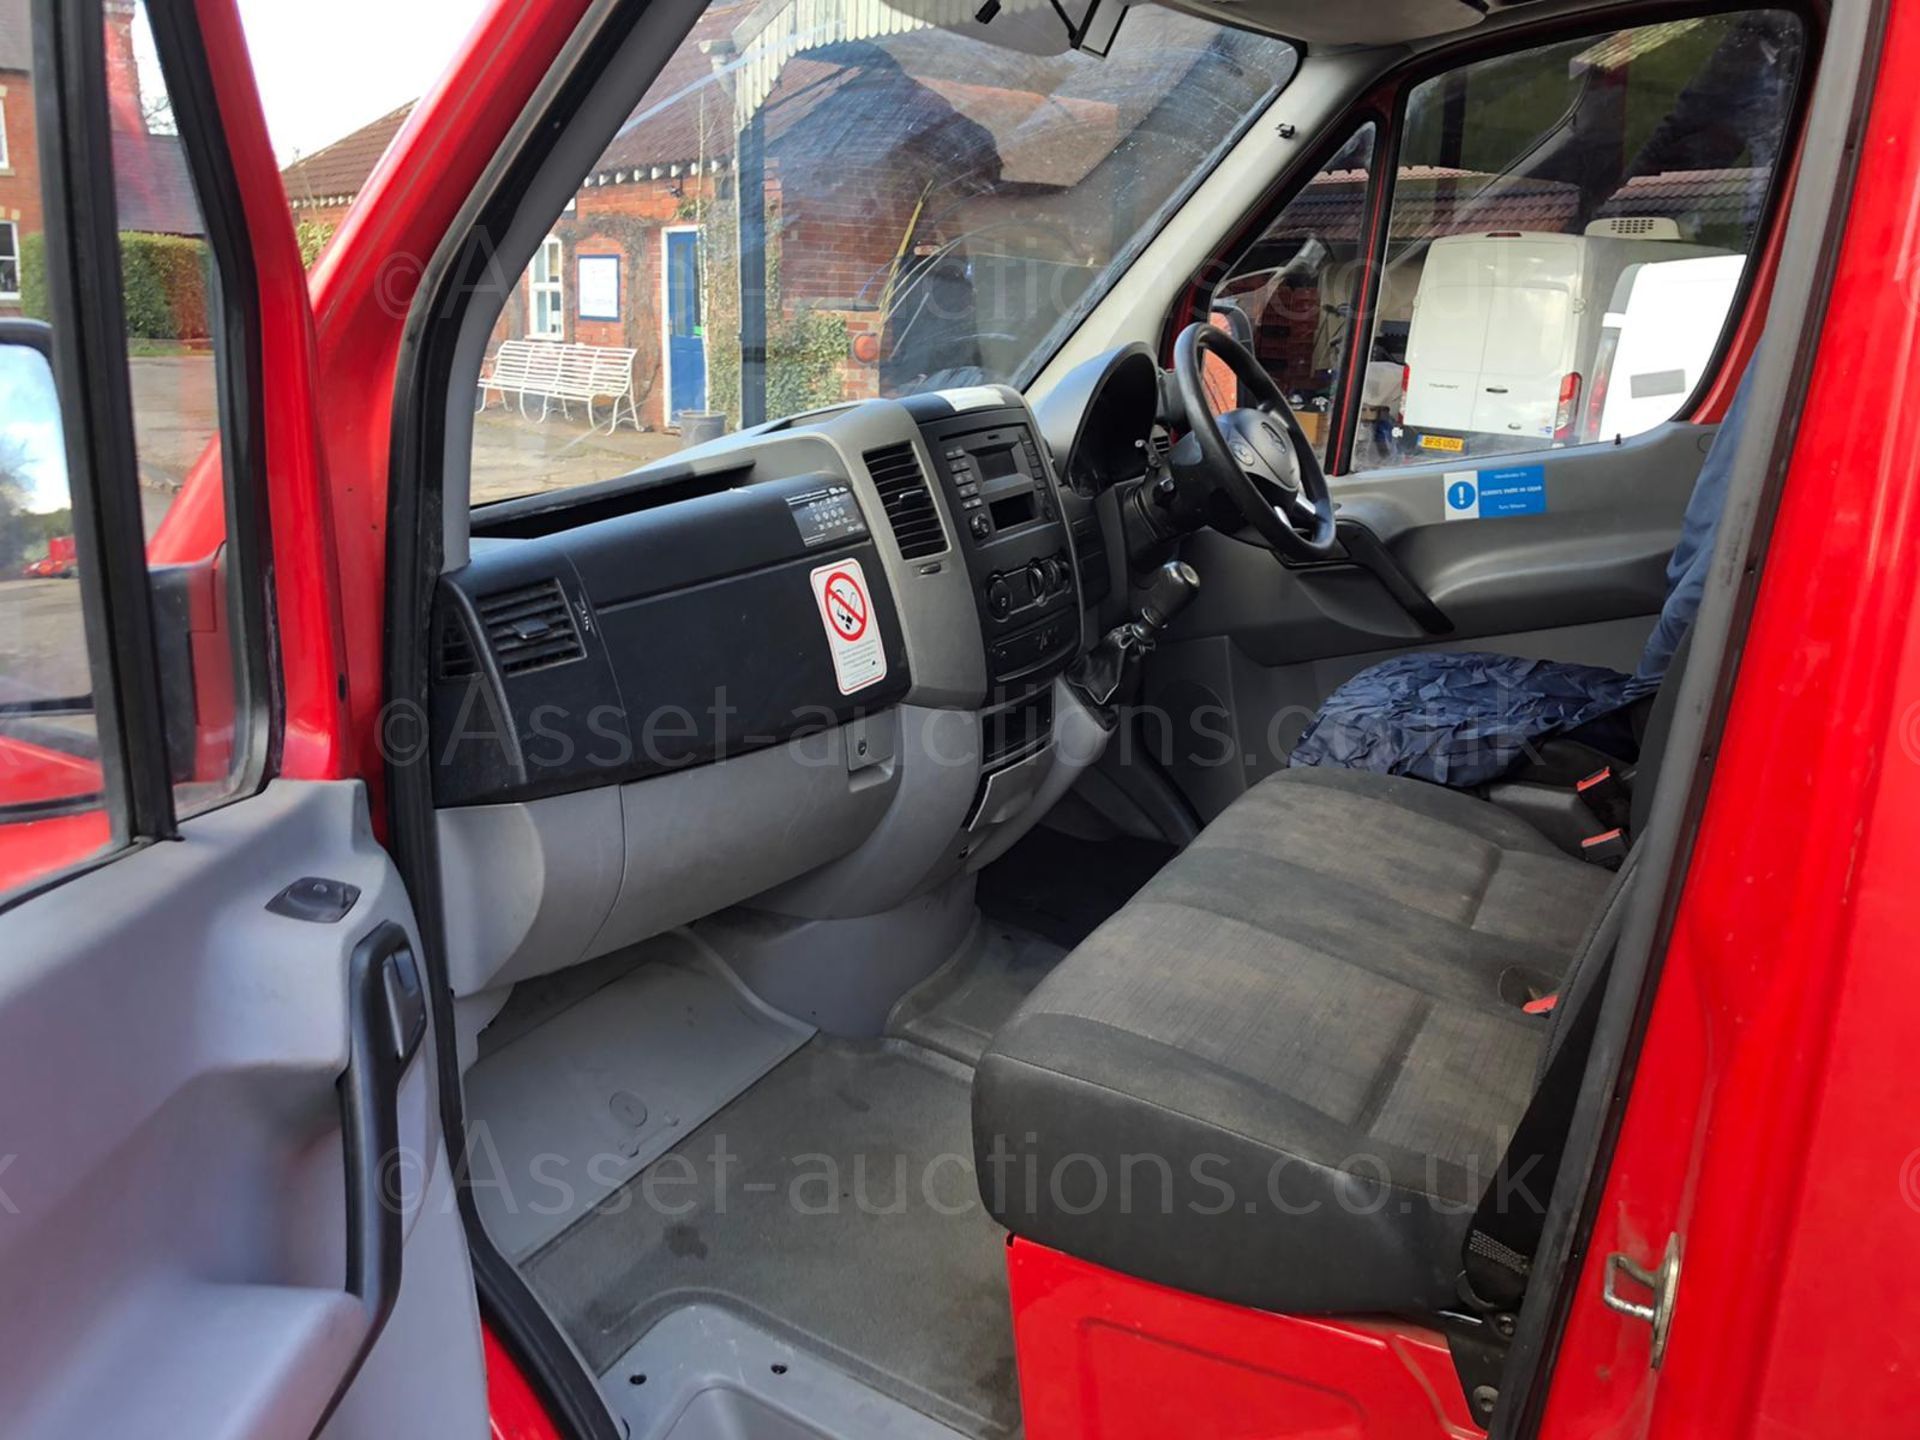 2013 MERCEDES-BENZ SPRINTER 310 CDI, DIESEL ENGINE, SHOWING 0 PREVIOUS KEEPERS *PLUS VAT* - Image 8 of 12